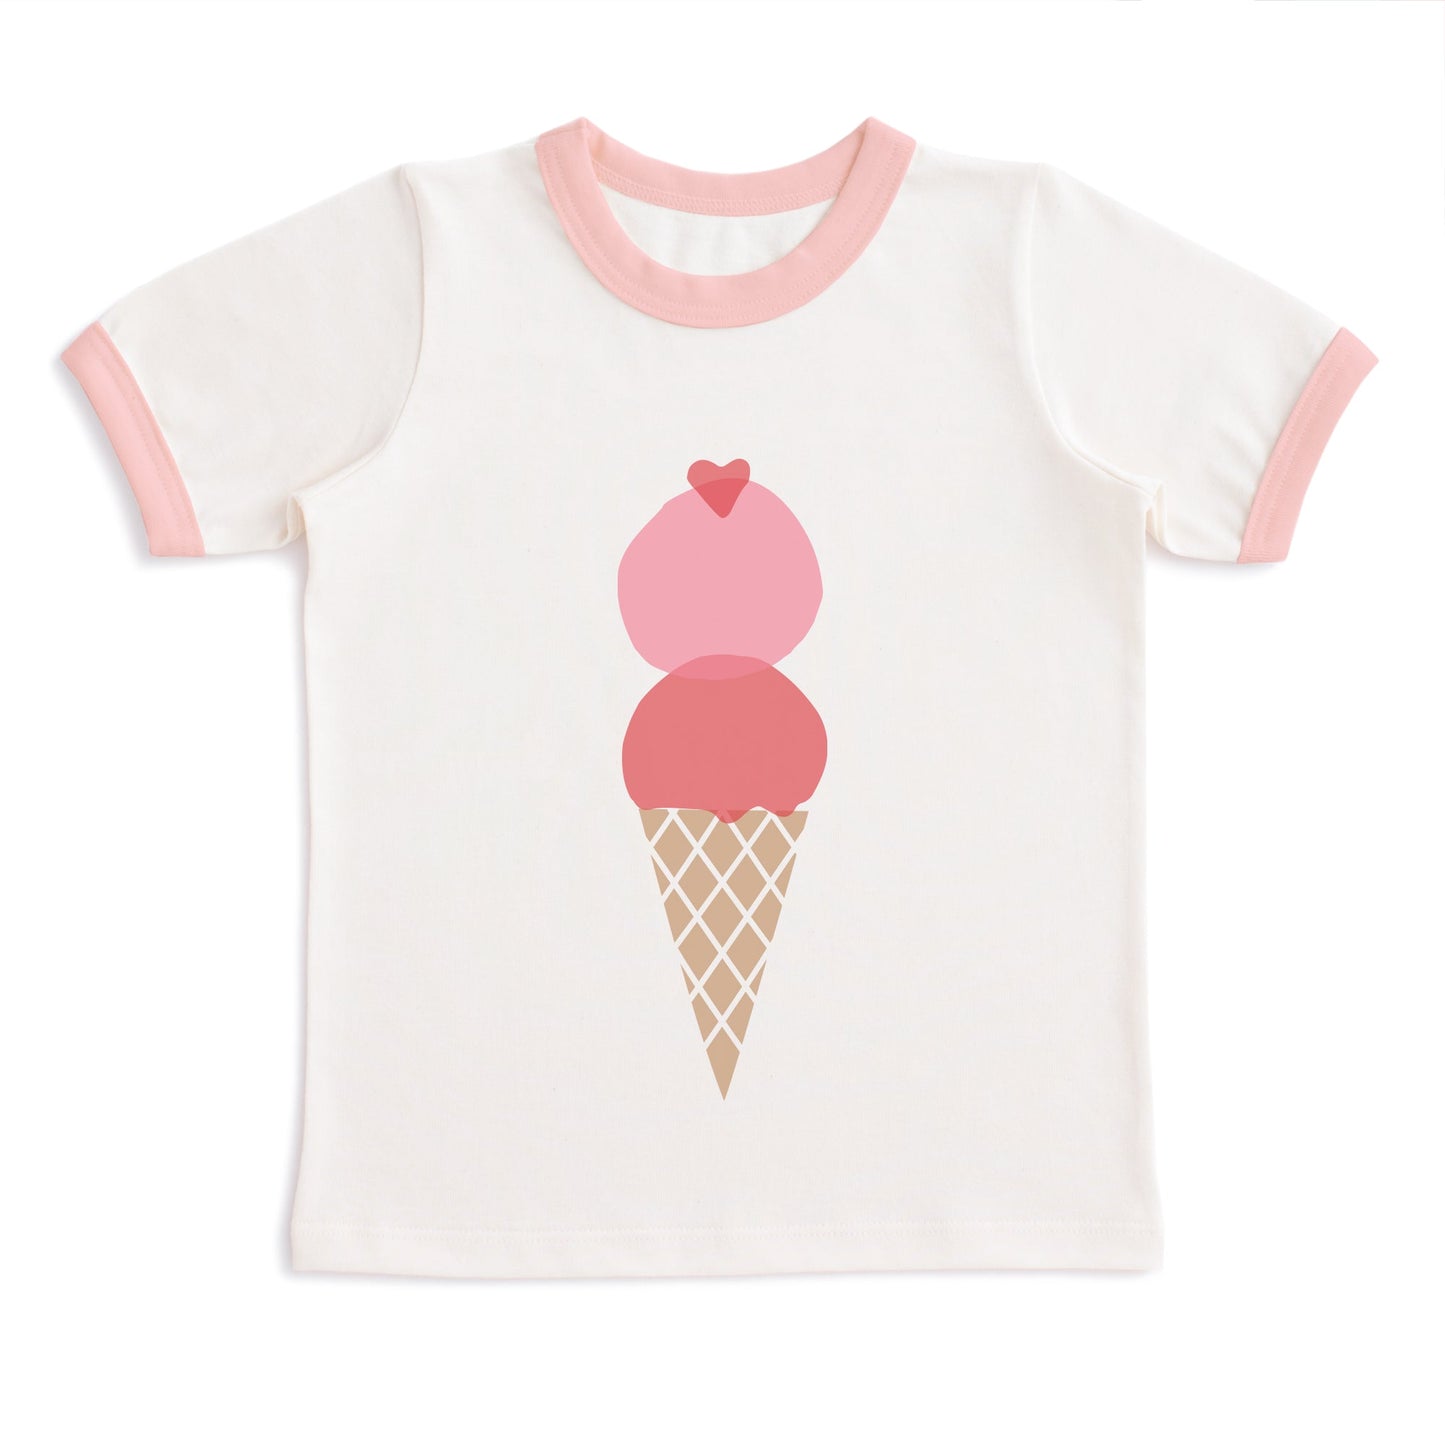 GRAPHIC Ringer Tee - Ice Cream Cone Natural & Pink